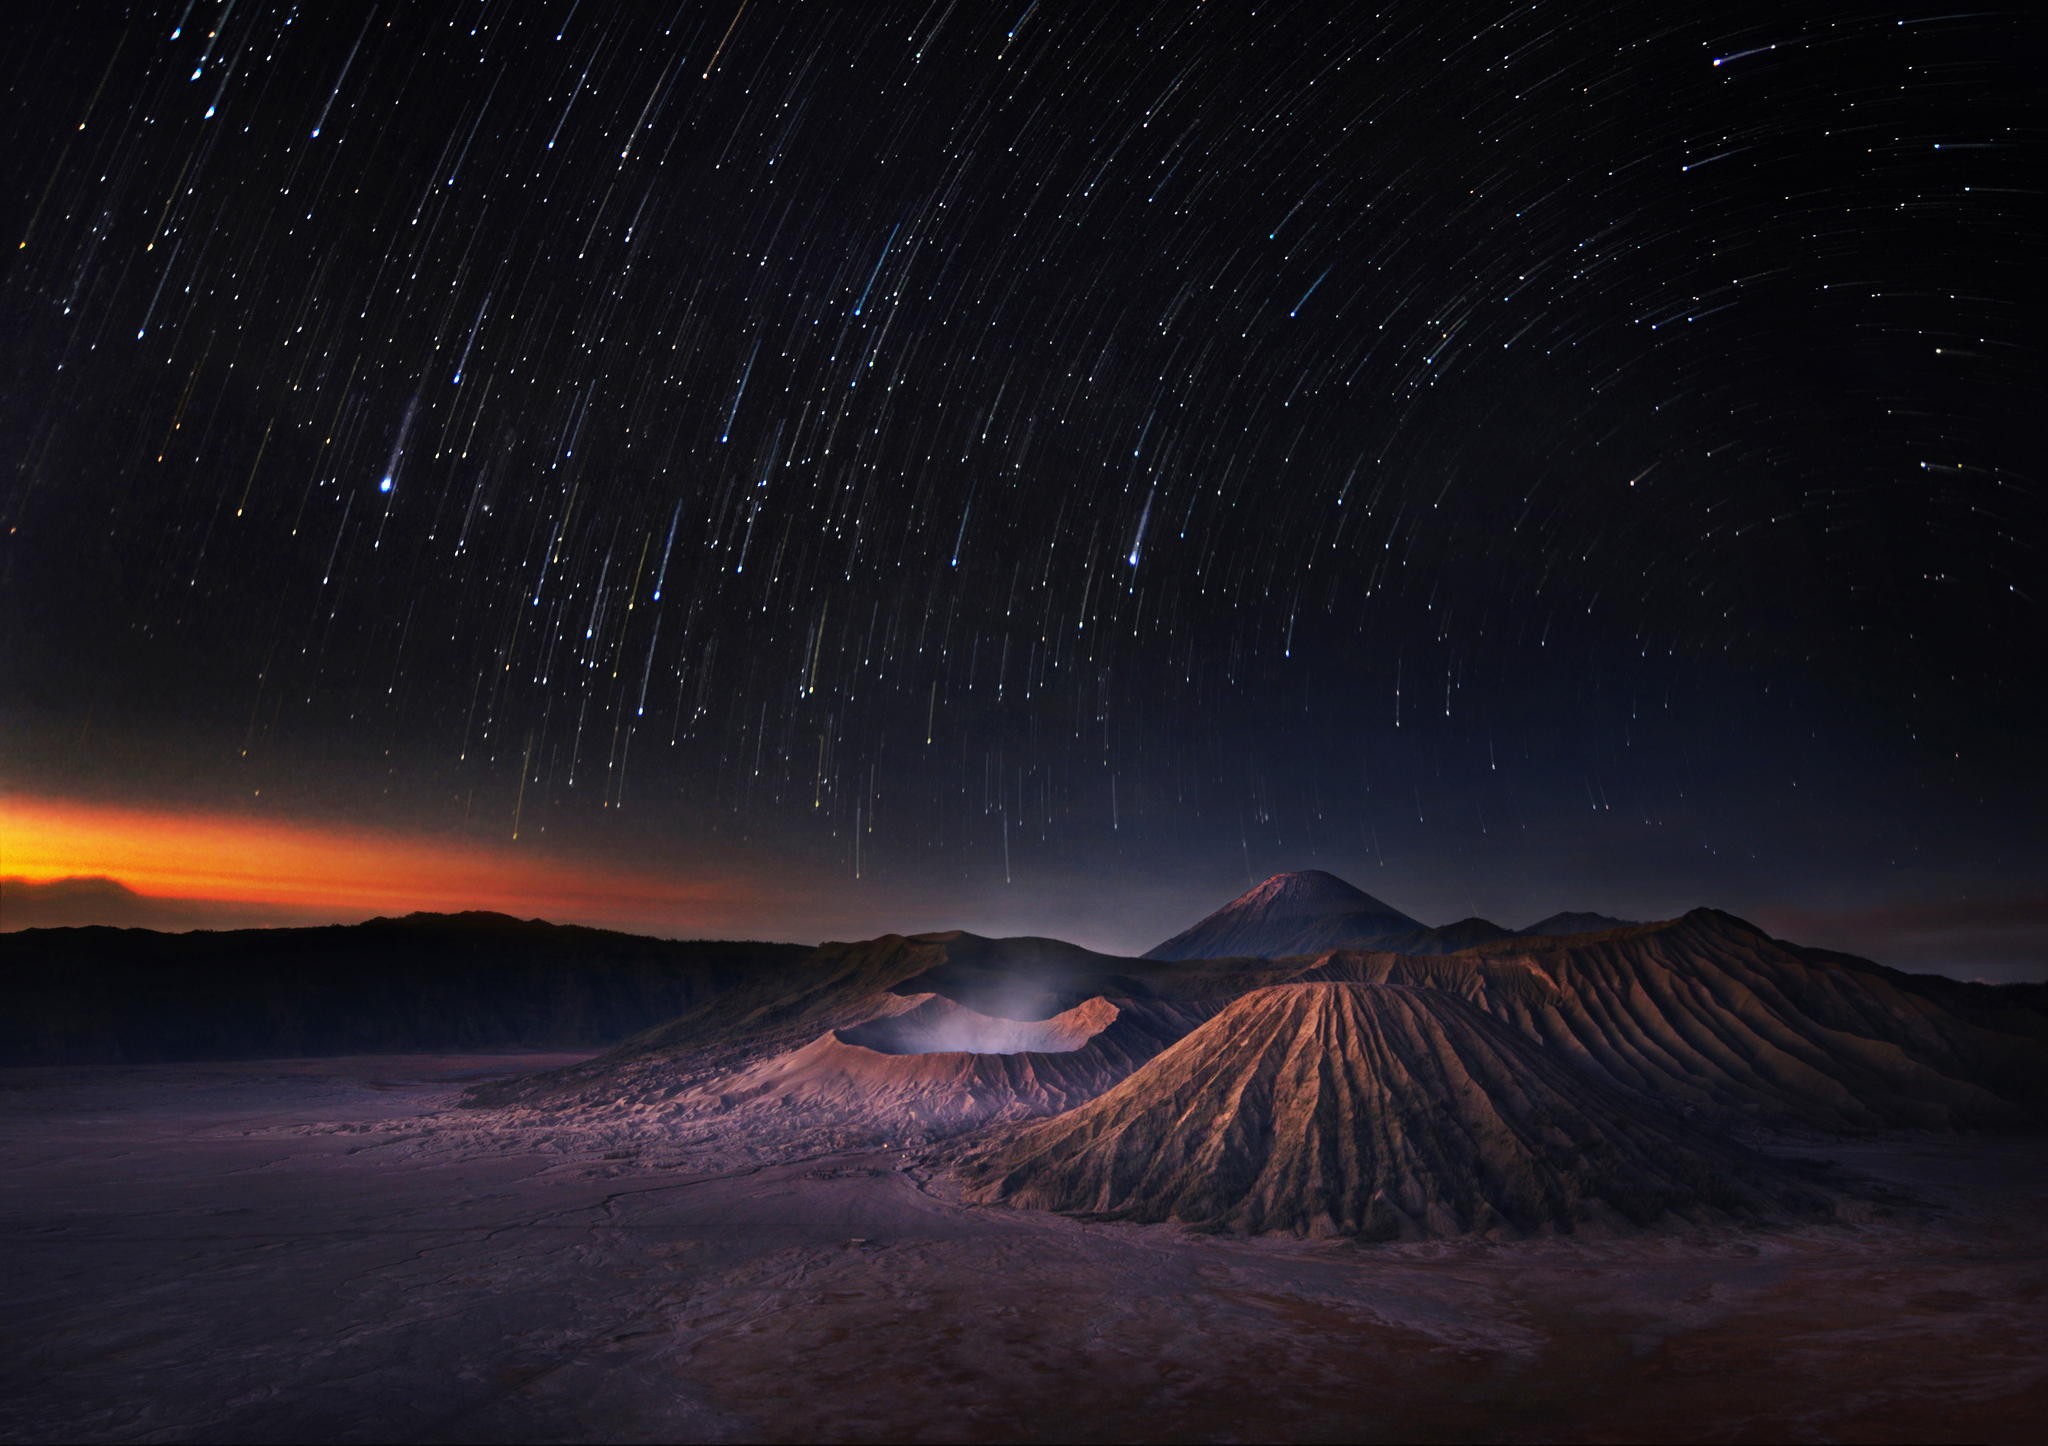 General 2048x1446 long exposure stars sky landscape nature volcano mountains Java (island) Mount Bromo star trails Indonesia